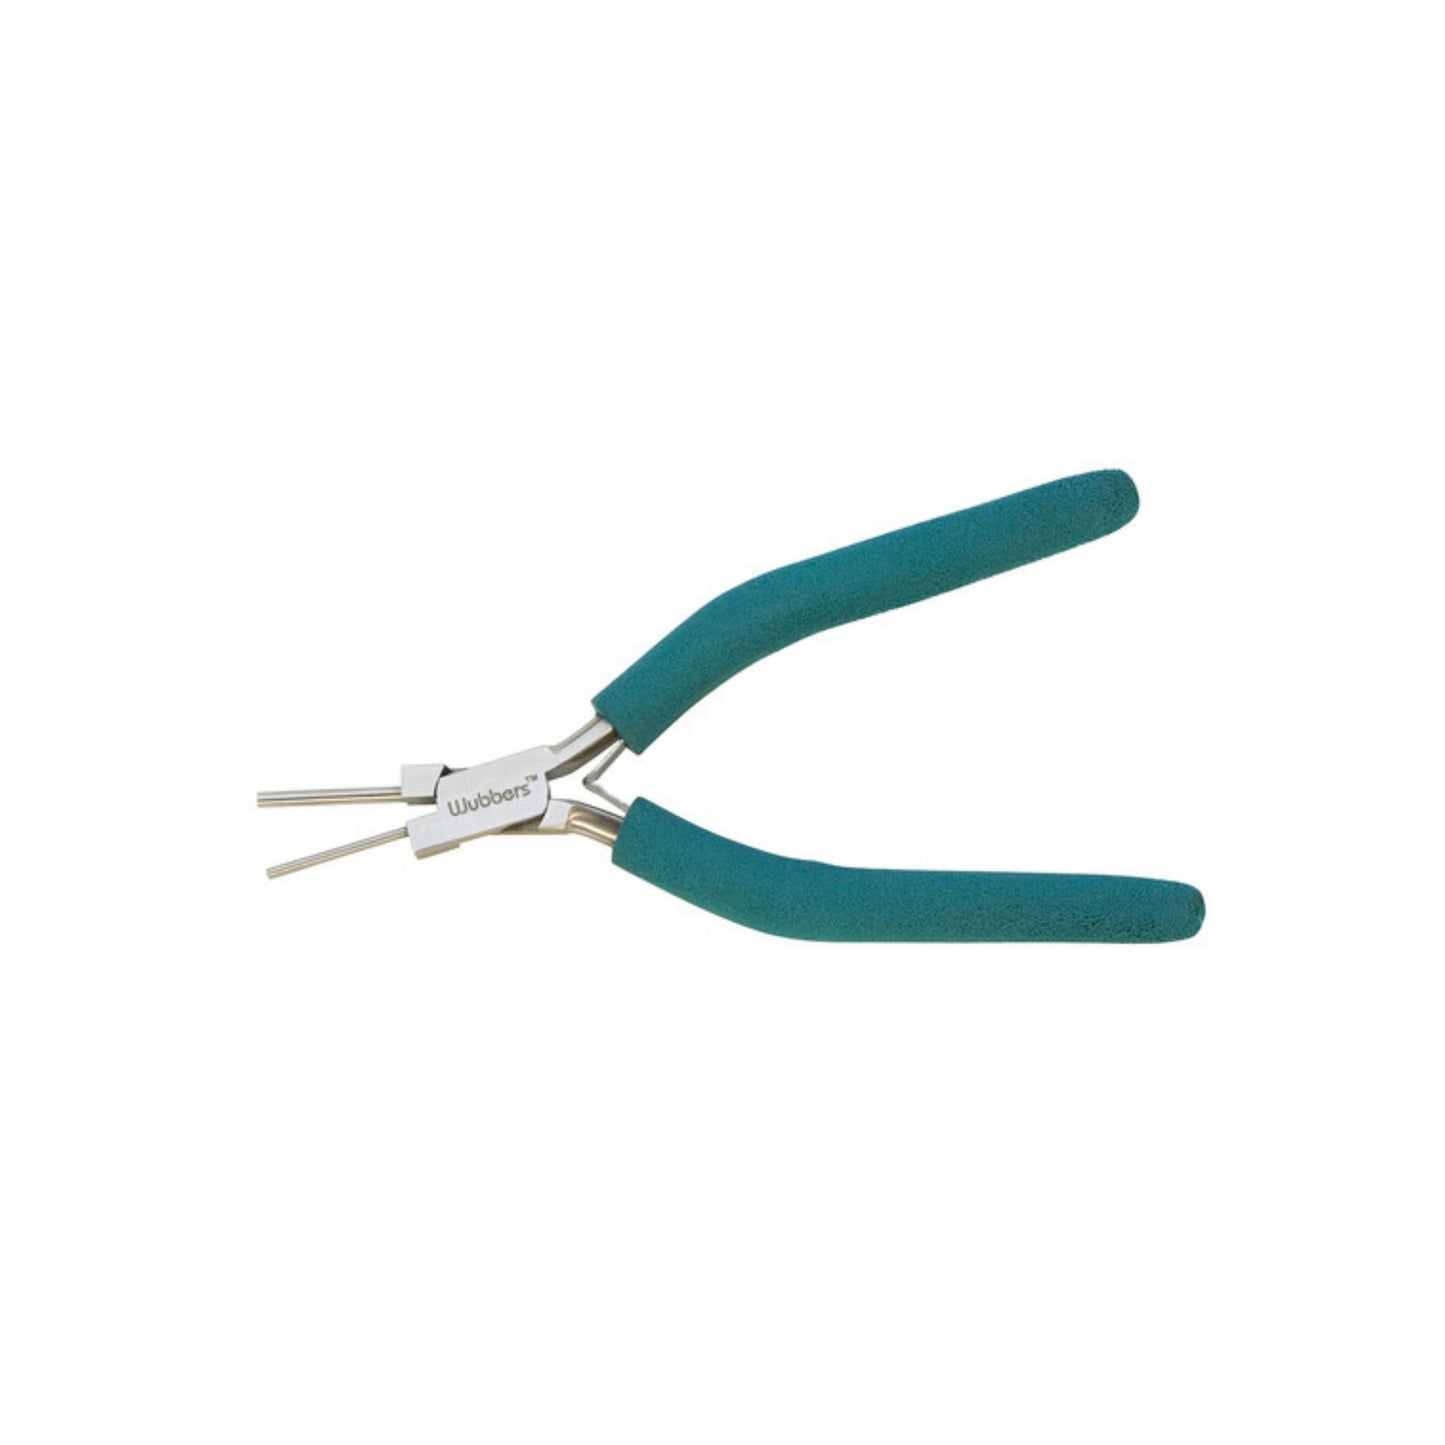 Wubbers® - Bail Making Pliers Small